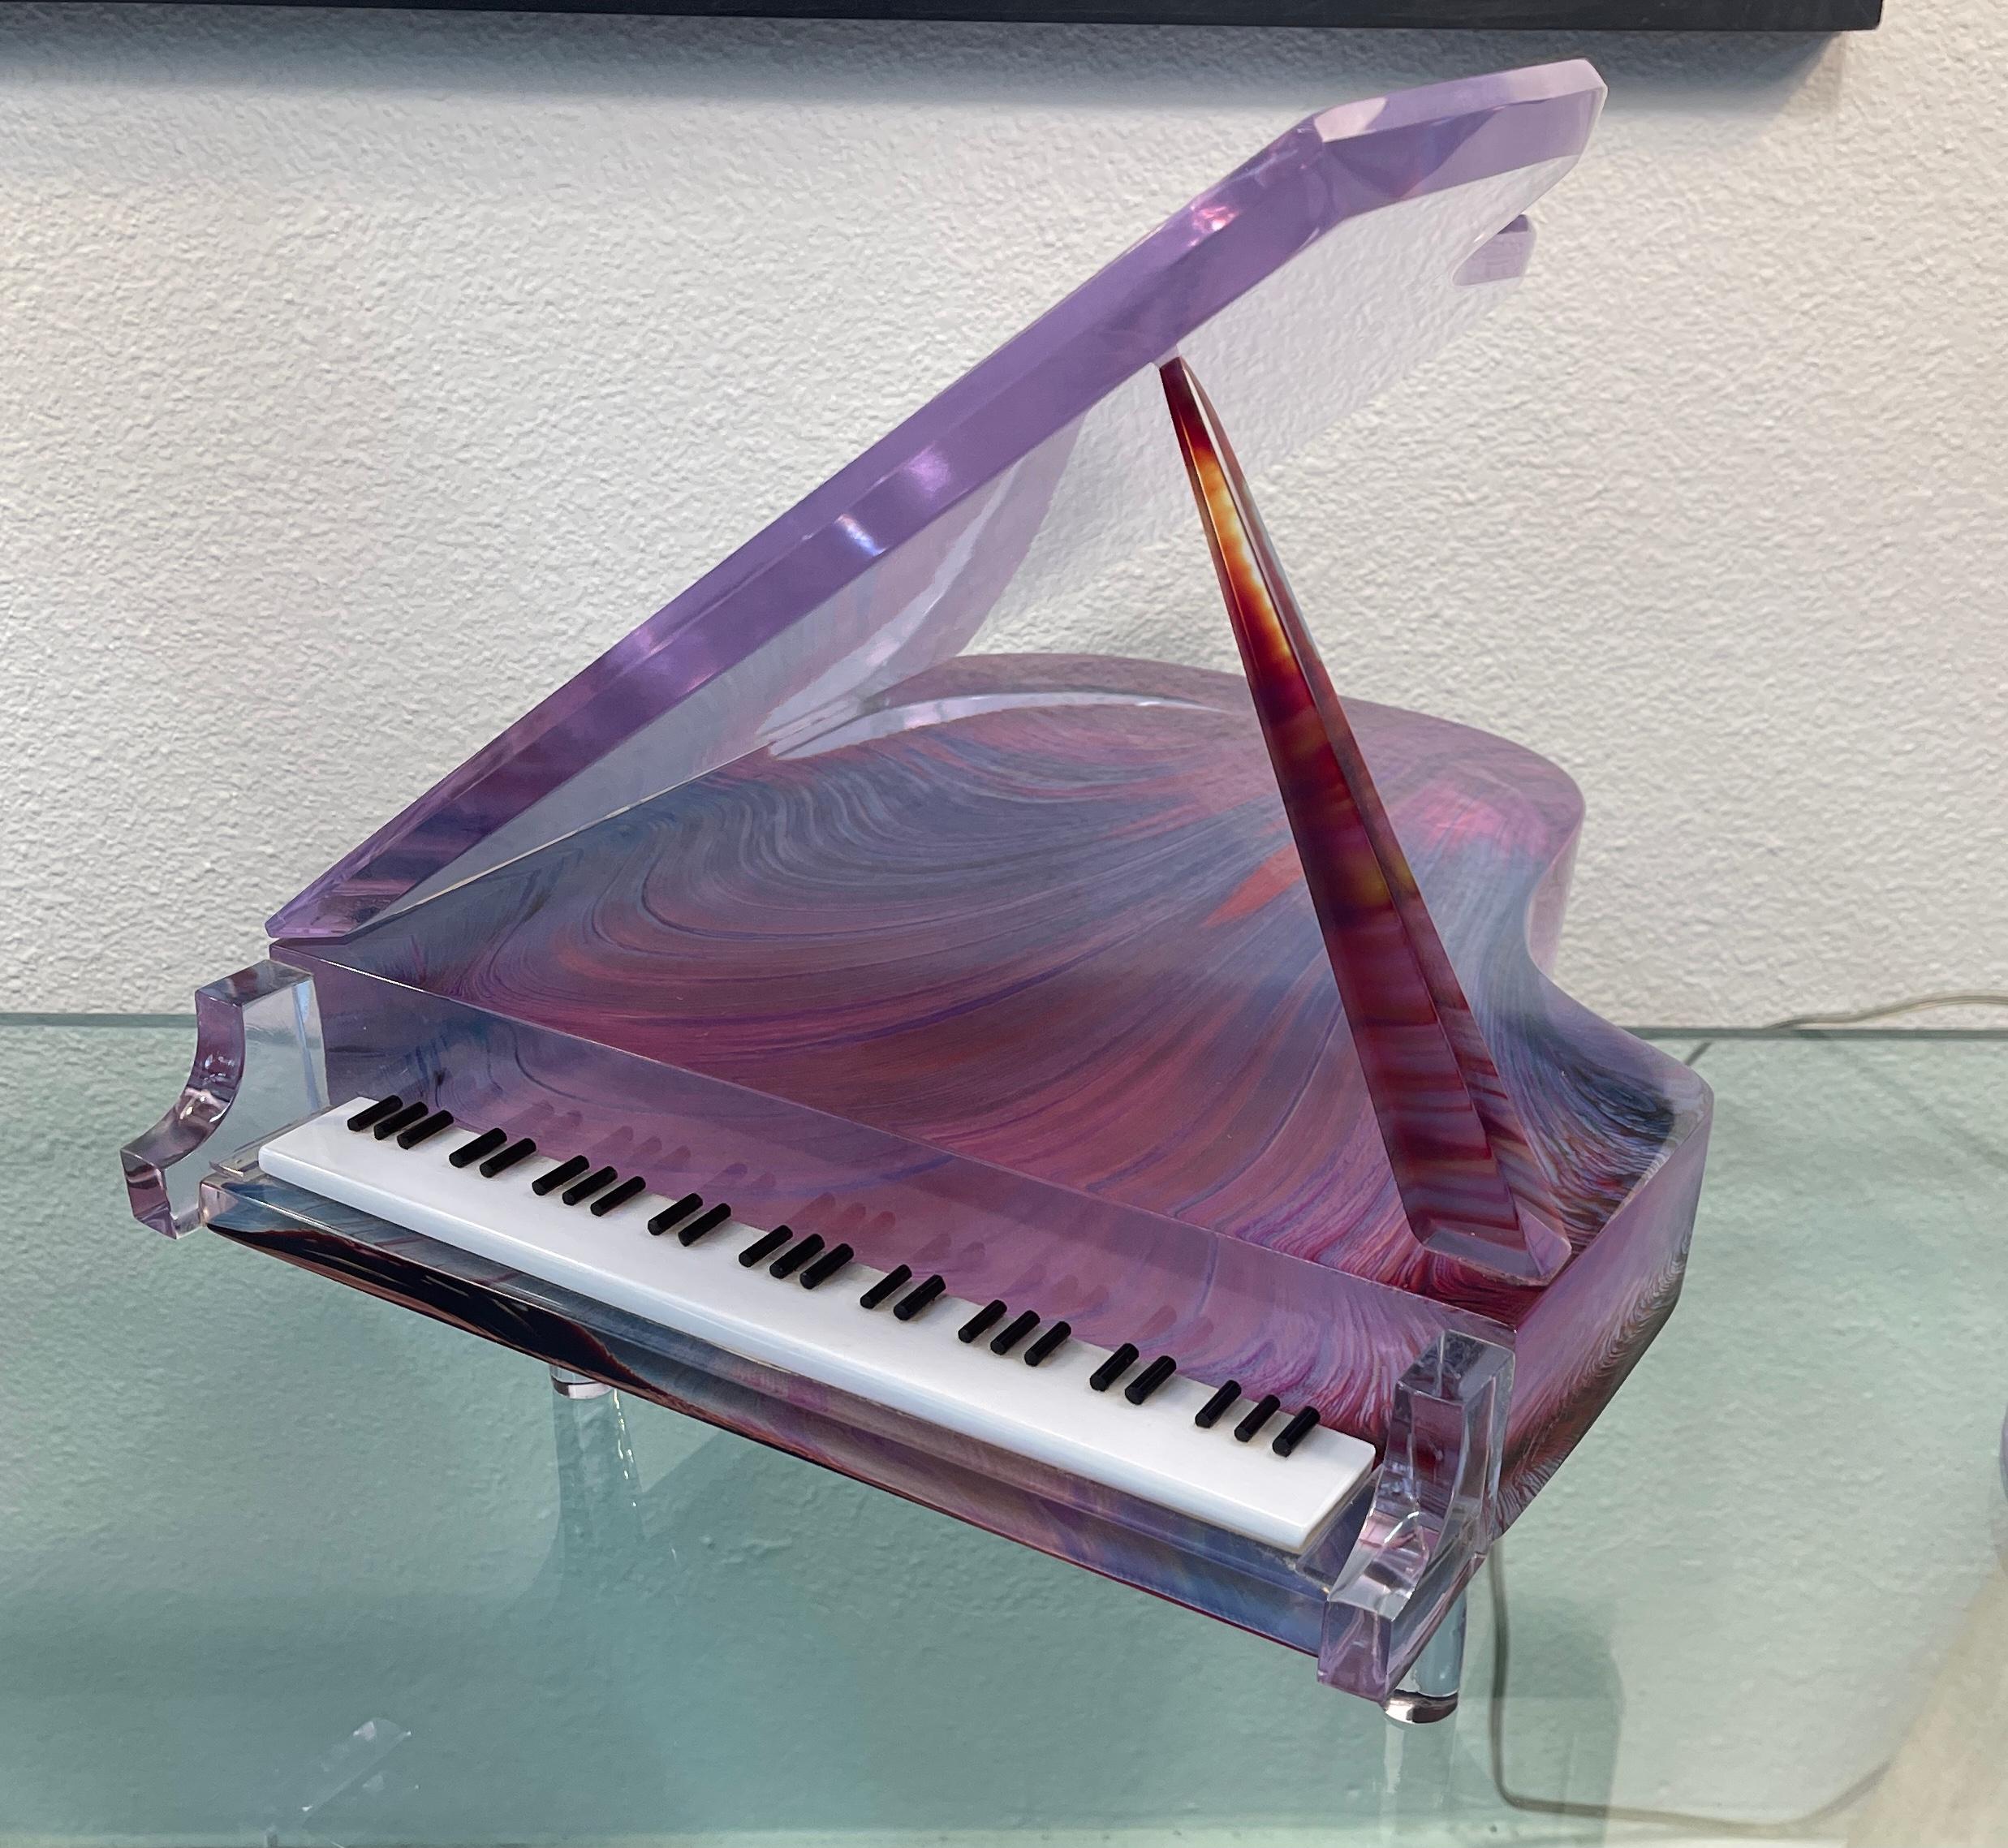 Wonderful large art glass piano by the Italian Master Dino Rosin. Crafted out of Chalcedony or Chalcedonio glass and inscribed Made for Ann Taylor, Dino Rosin. We're not sure if this was for the corporate Ann Taylor or an individual. Out of a Palm